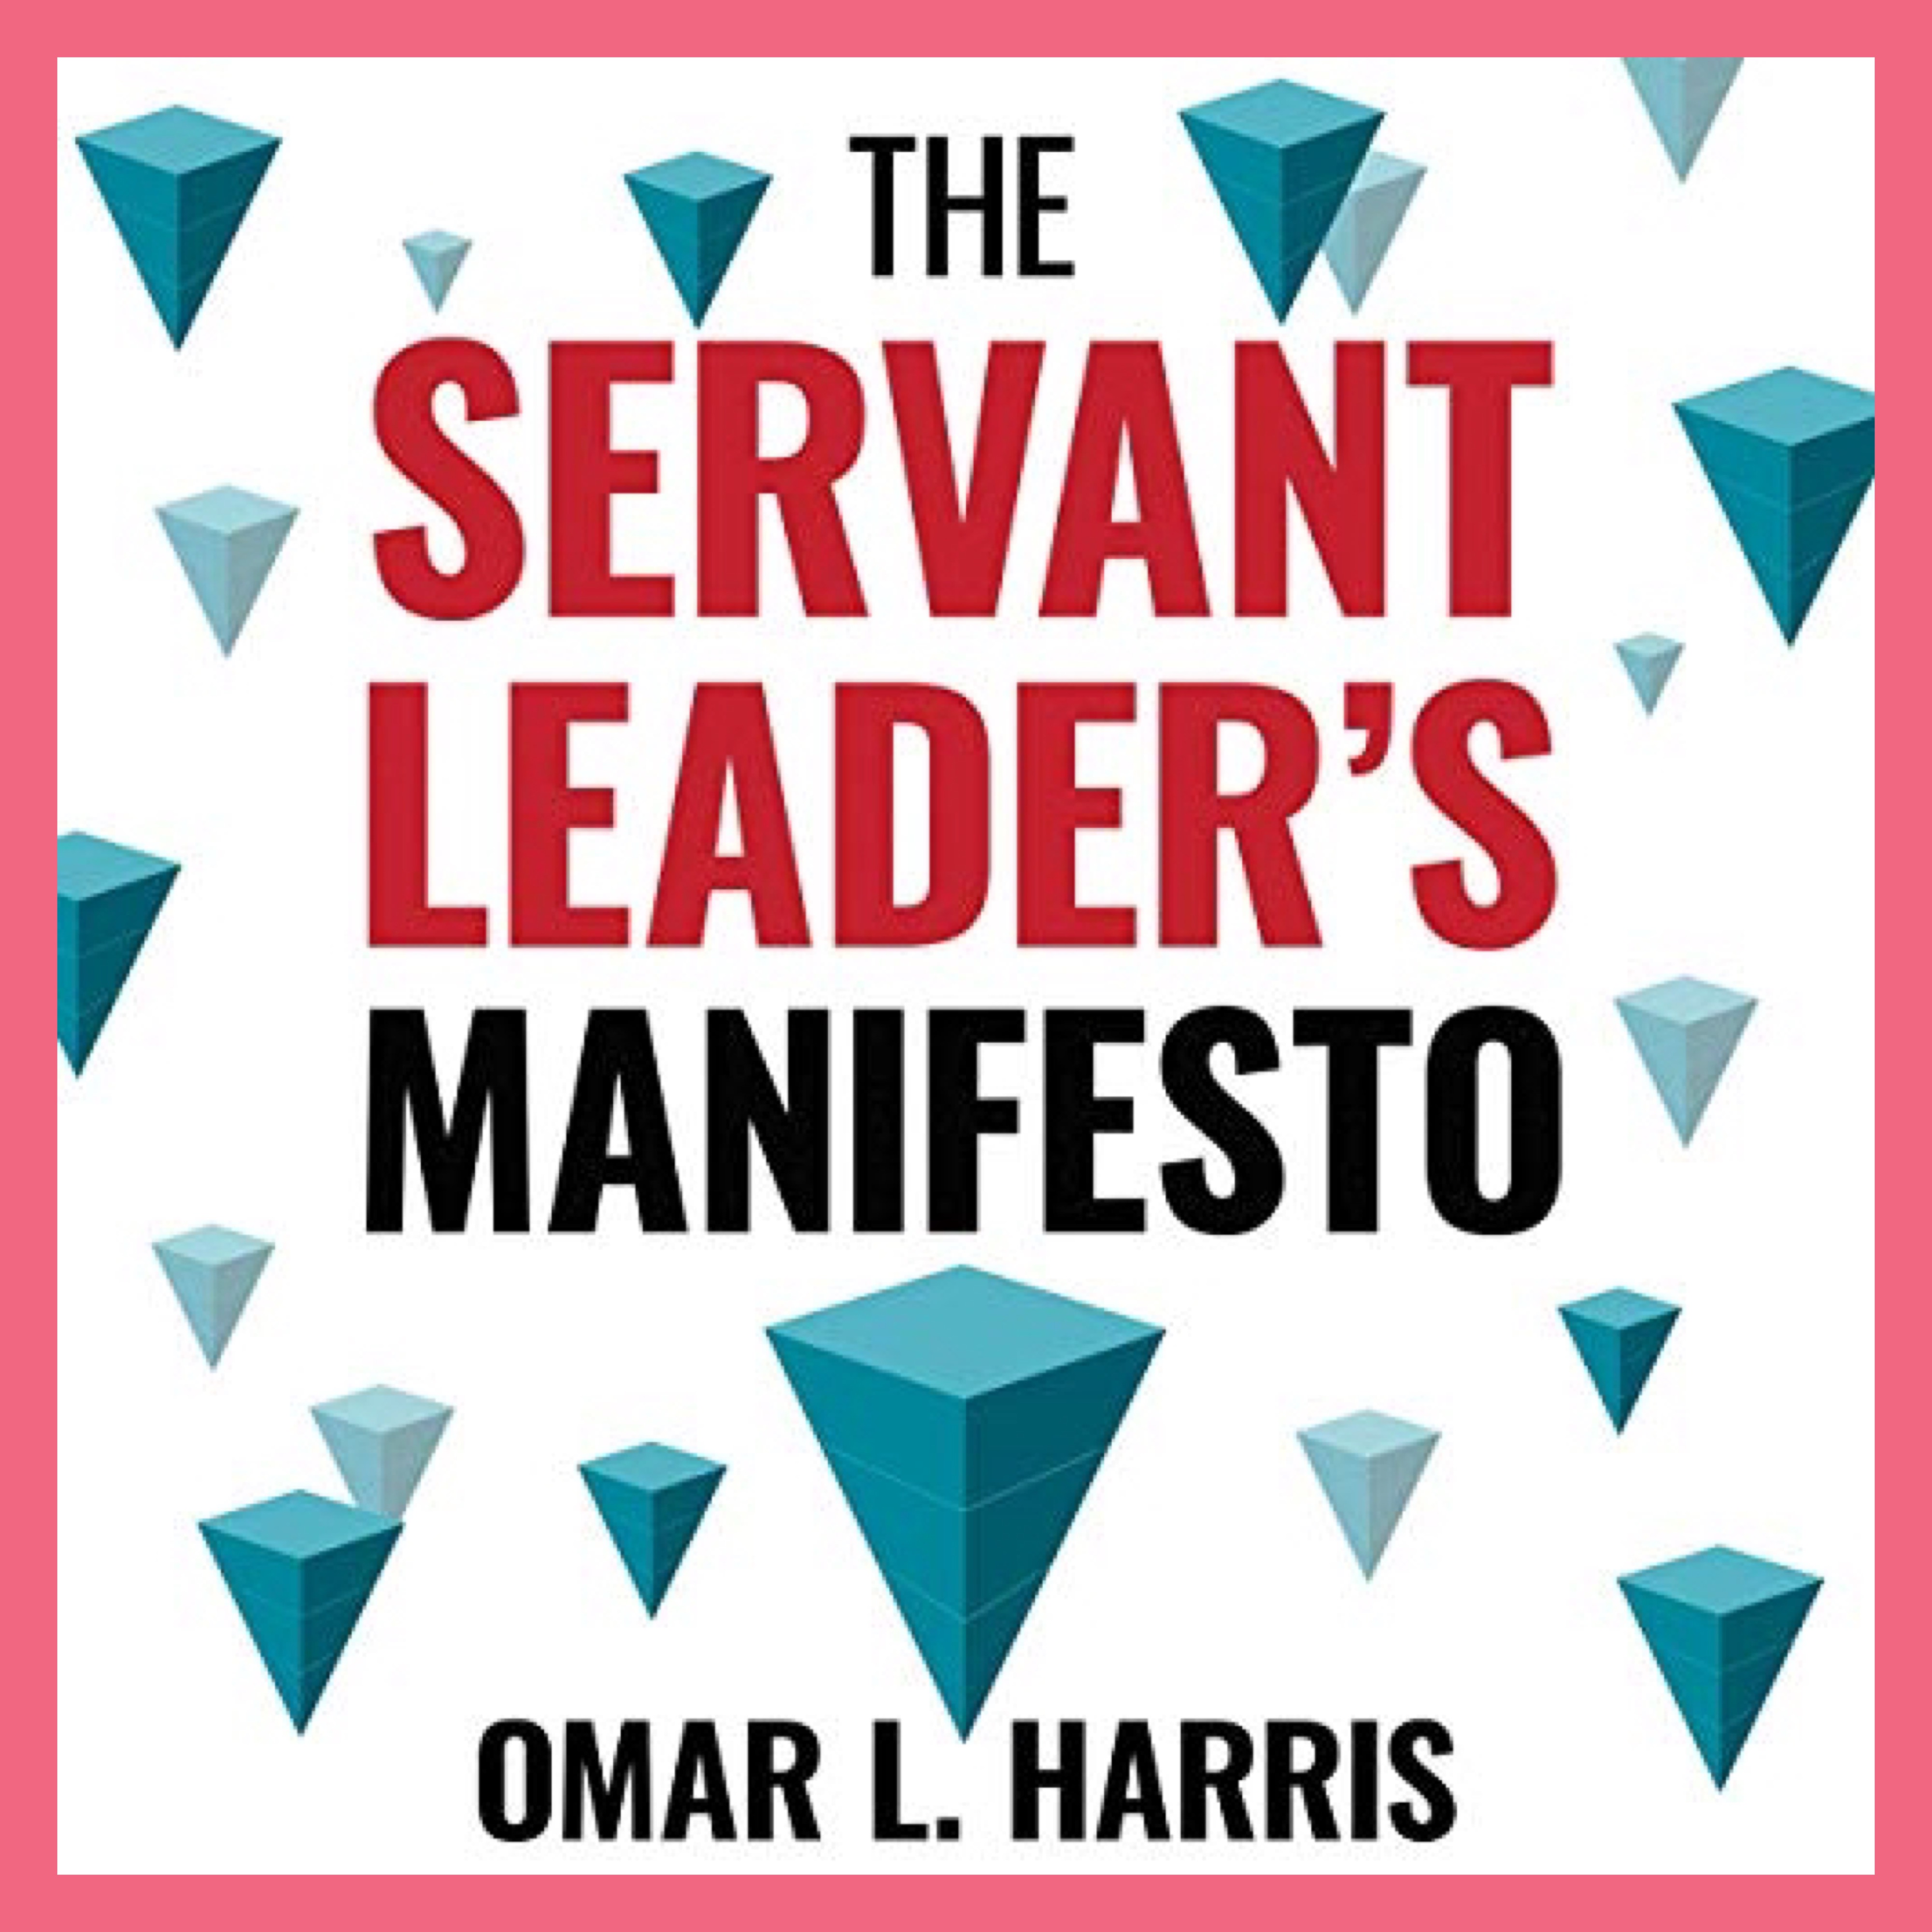 Managers and leaders can also listen to Omar L. Harris' audiobook for his bestselling book, "The Servant Leader's Manifesto"